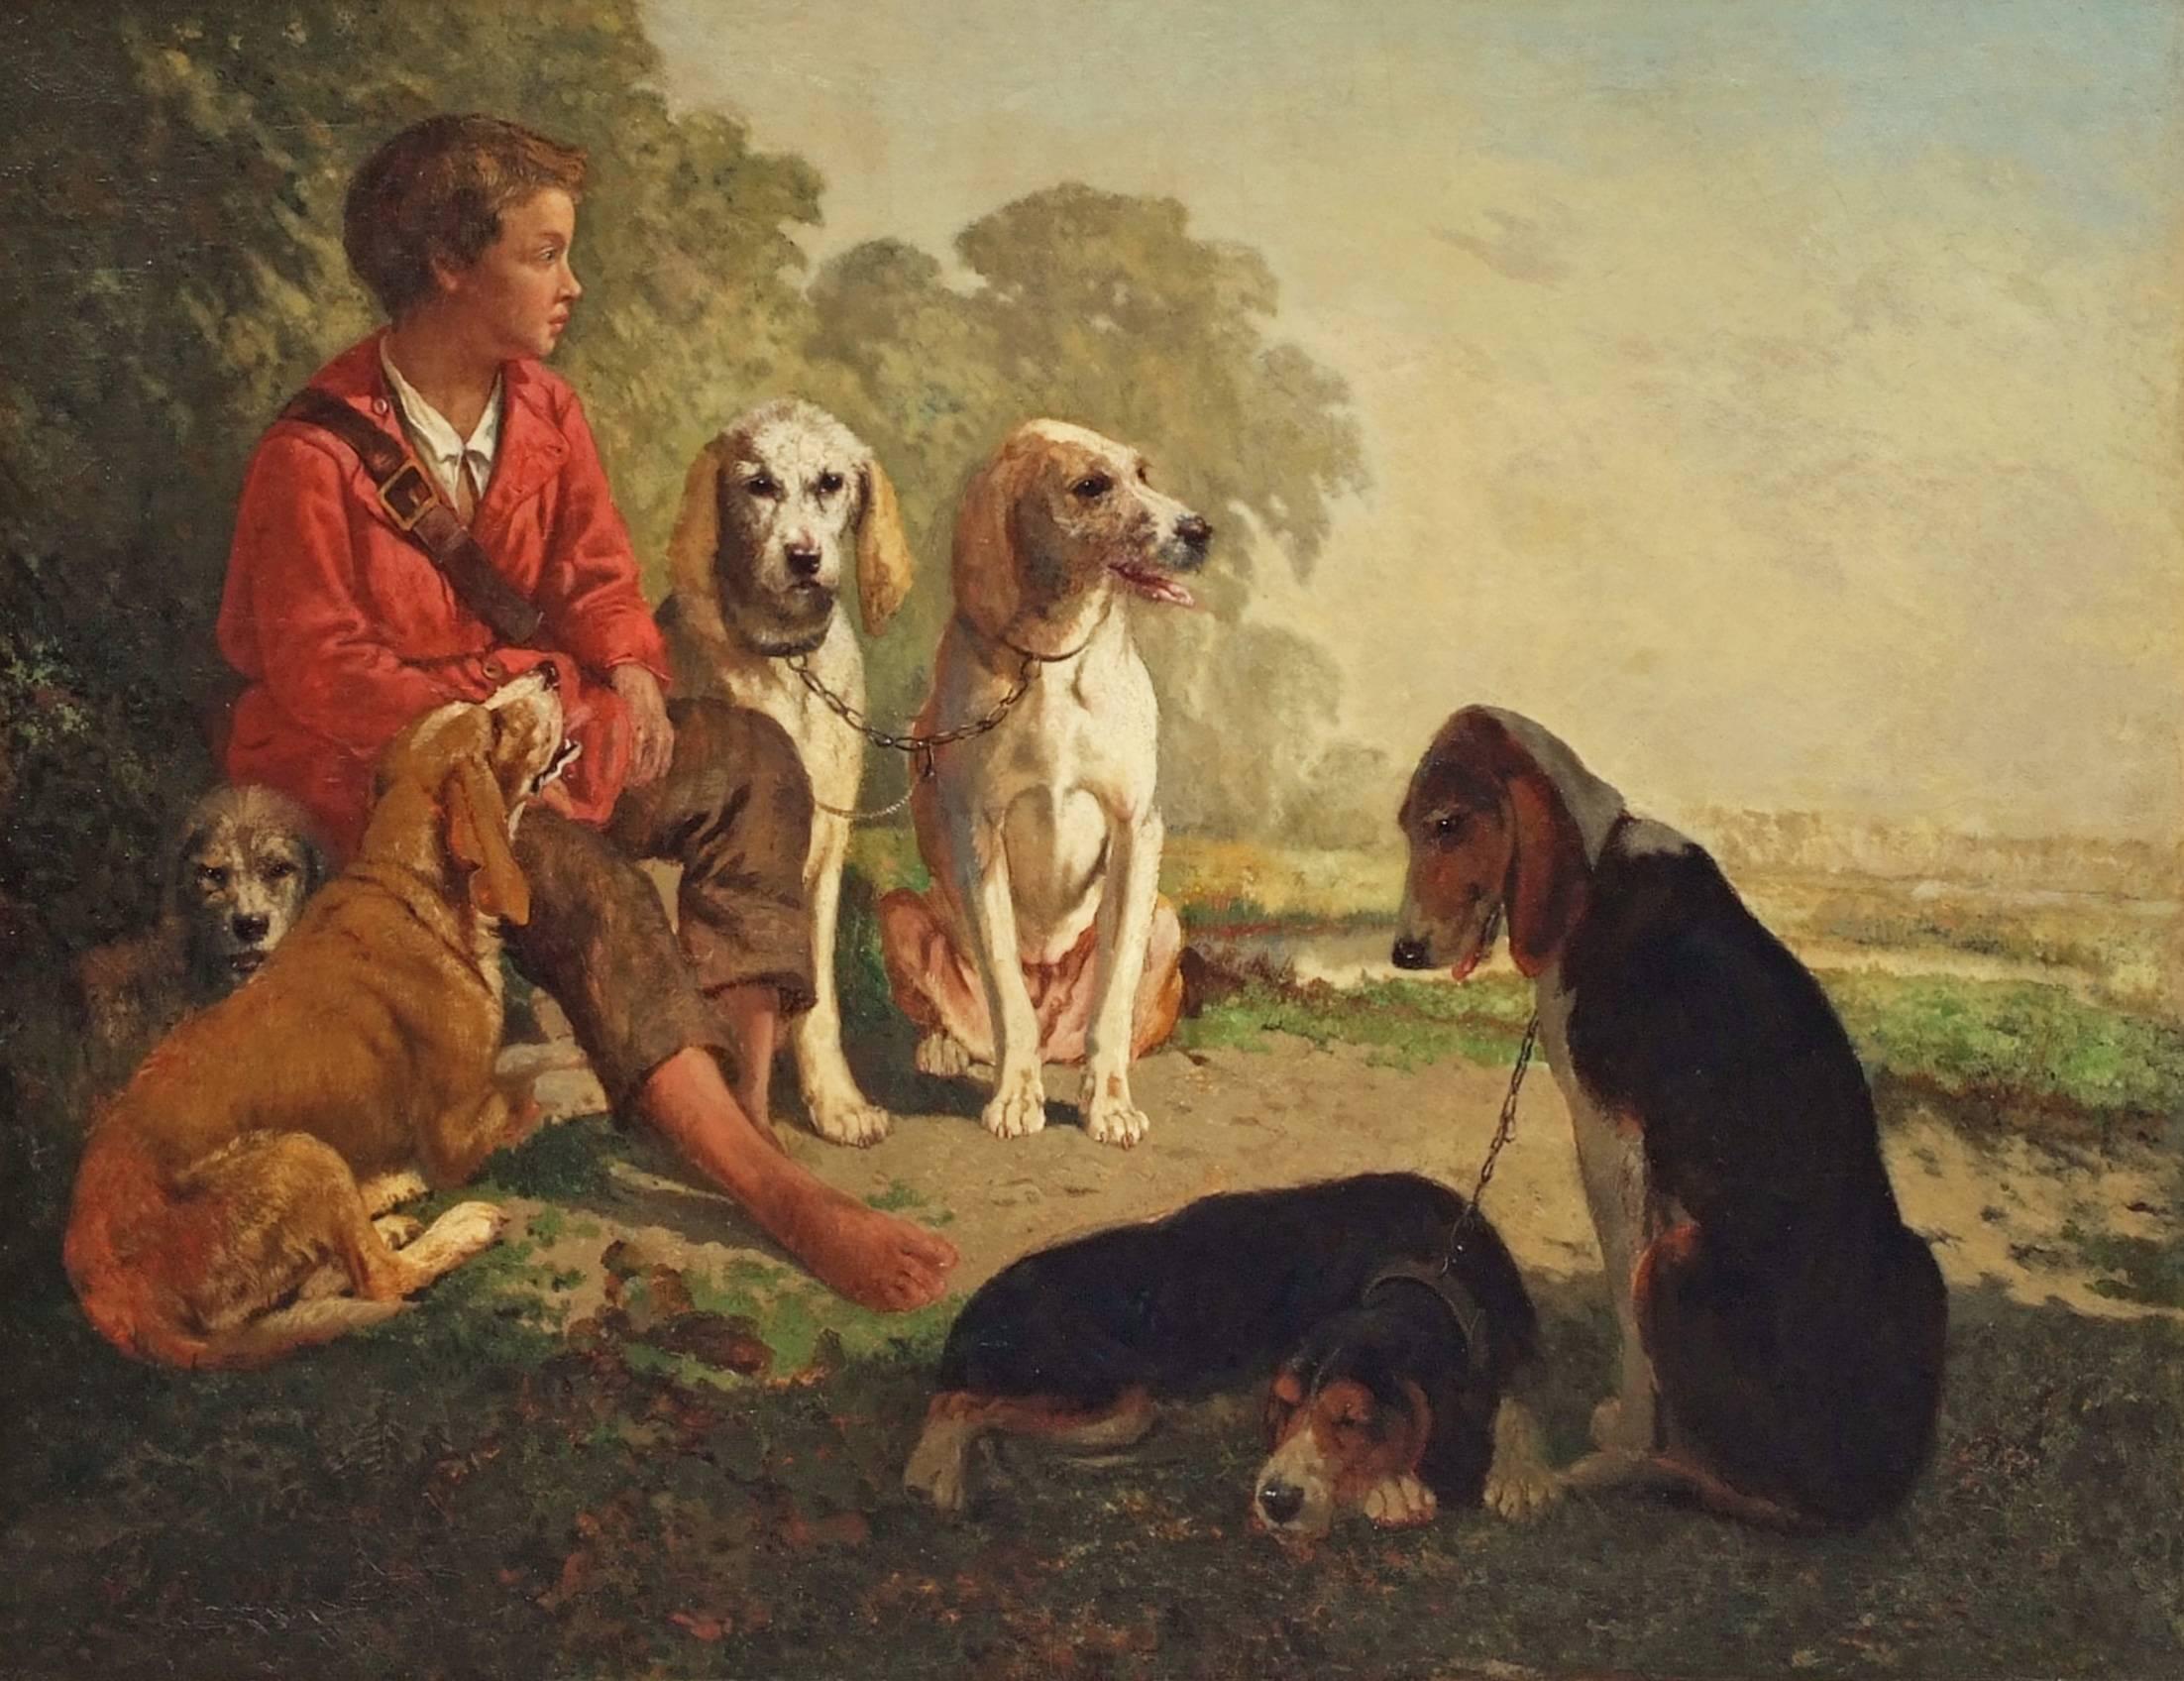 Painting 19th century Portrait Hunting Scene with Dogs - Brown Landscape Painting by Joos Vincent de Vos